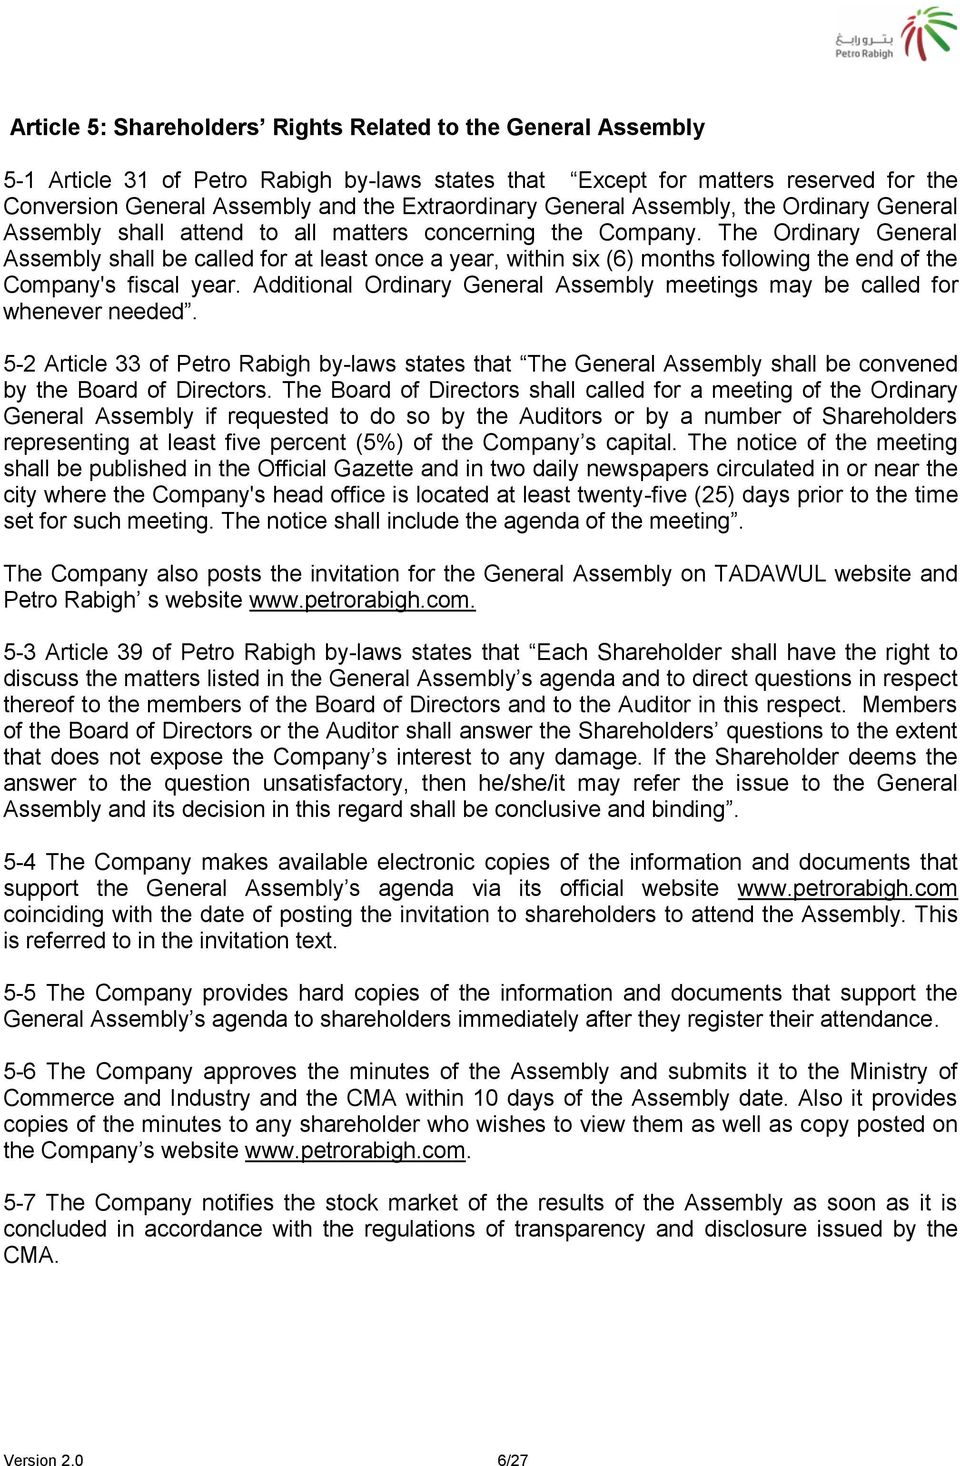 The Ordinary General Assembly shall be called for at least once a year, within six (6) months following the end of the Company's fiscal year.